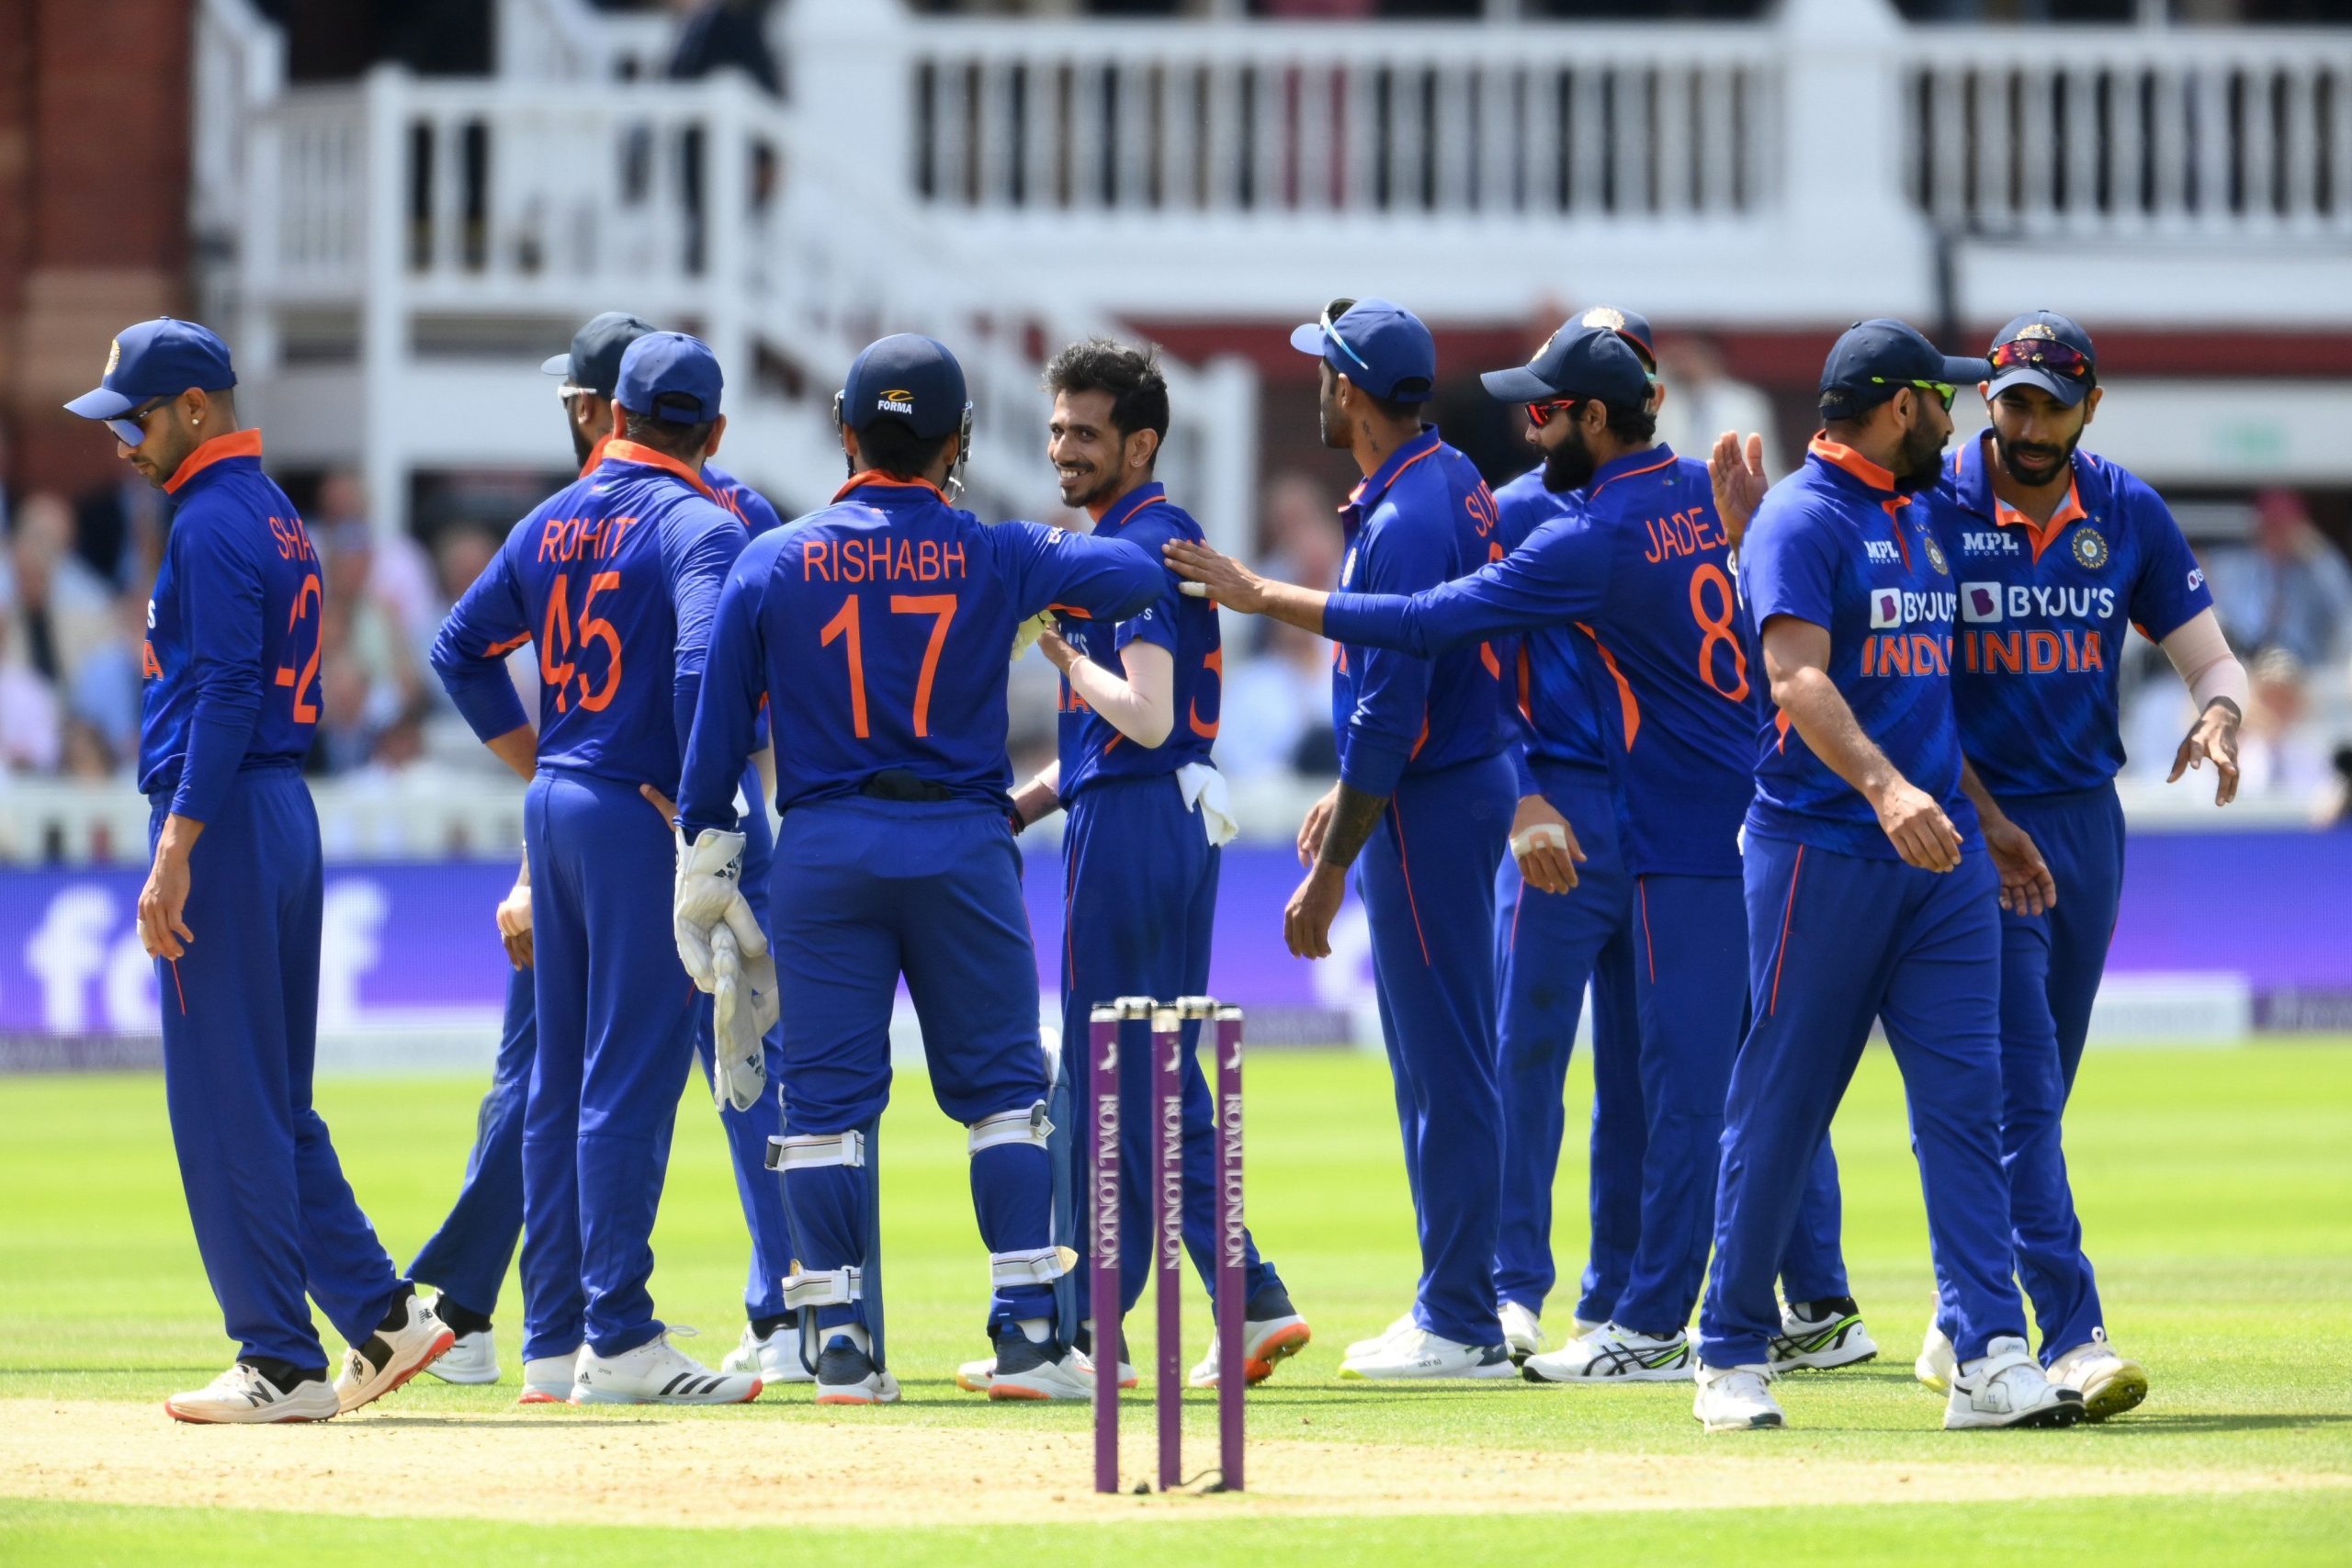 Yuzvendra Chahal, with 4/47 vs England, becomes first Indian to huge ODI feat